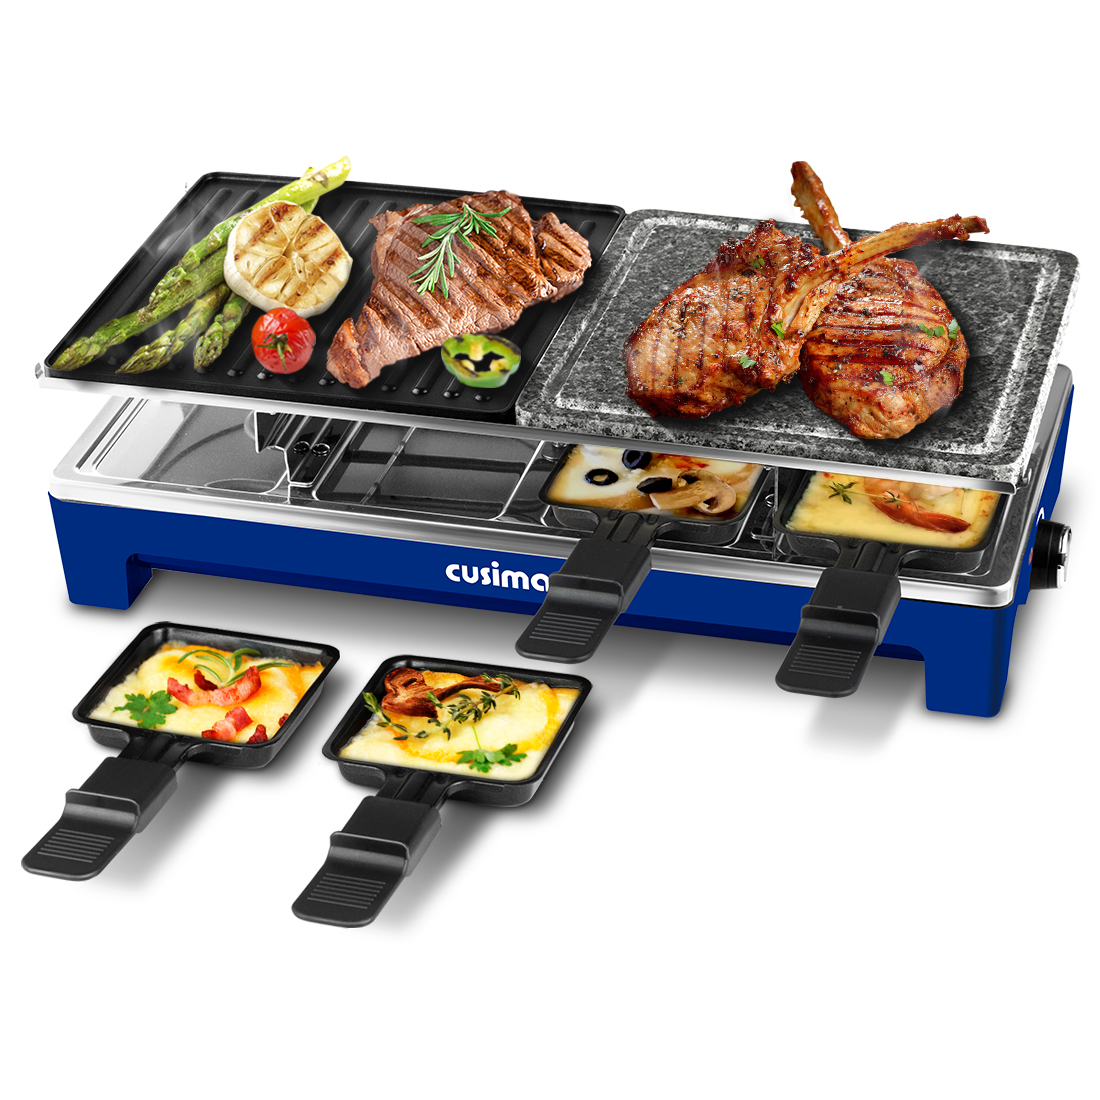 8 Persons Raclette Grill with Stone Plate - China Raclette Grill